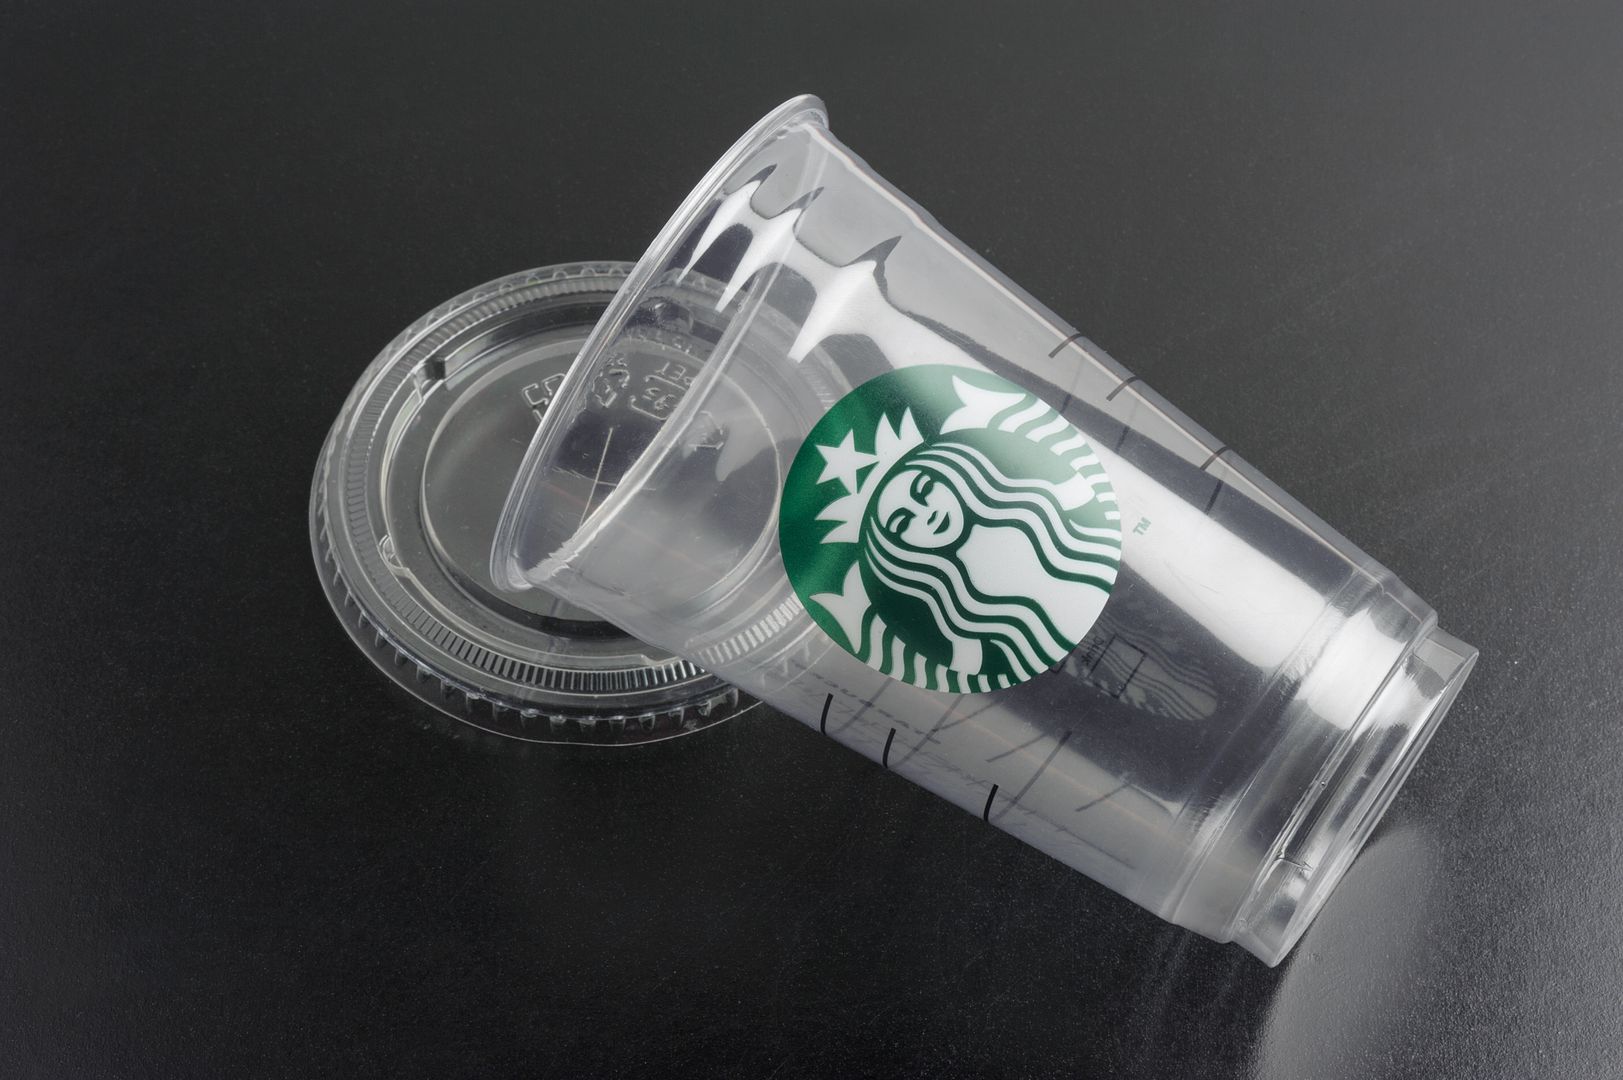 IWF - Magazine: Strawless Starbucks Containers Actually Use More Plastic